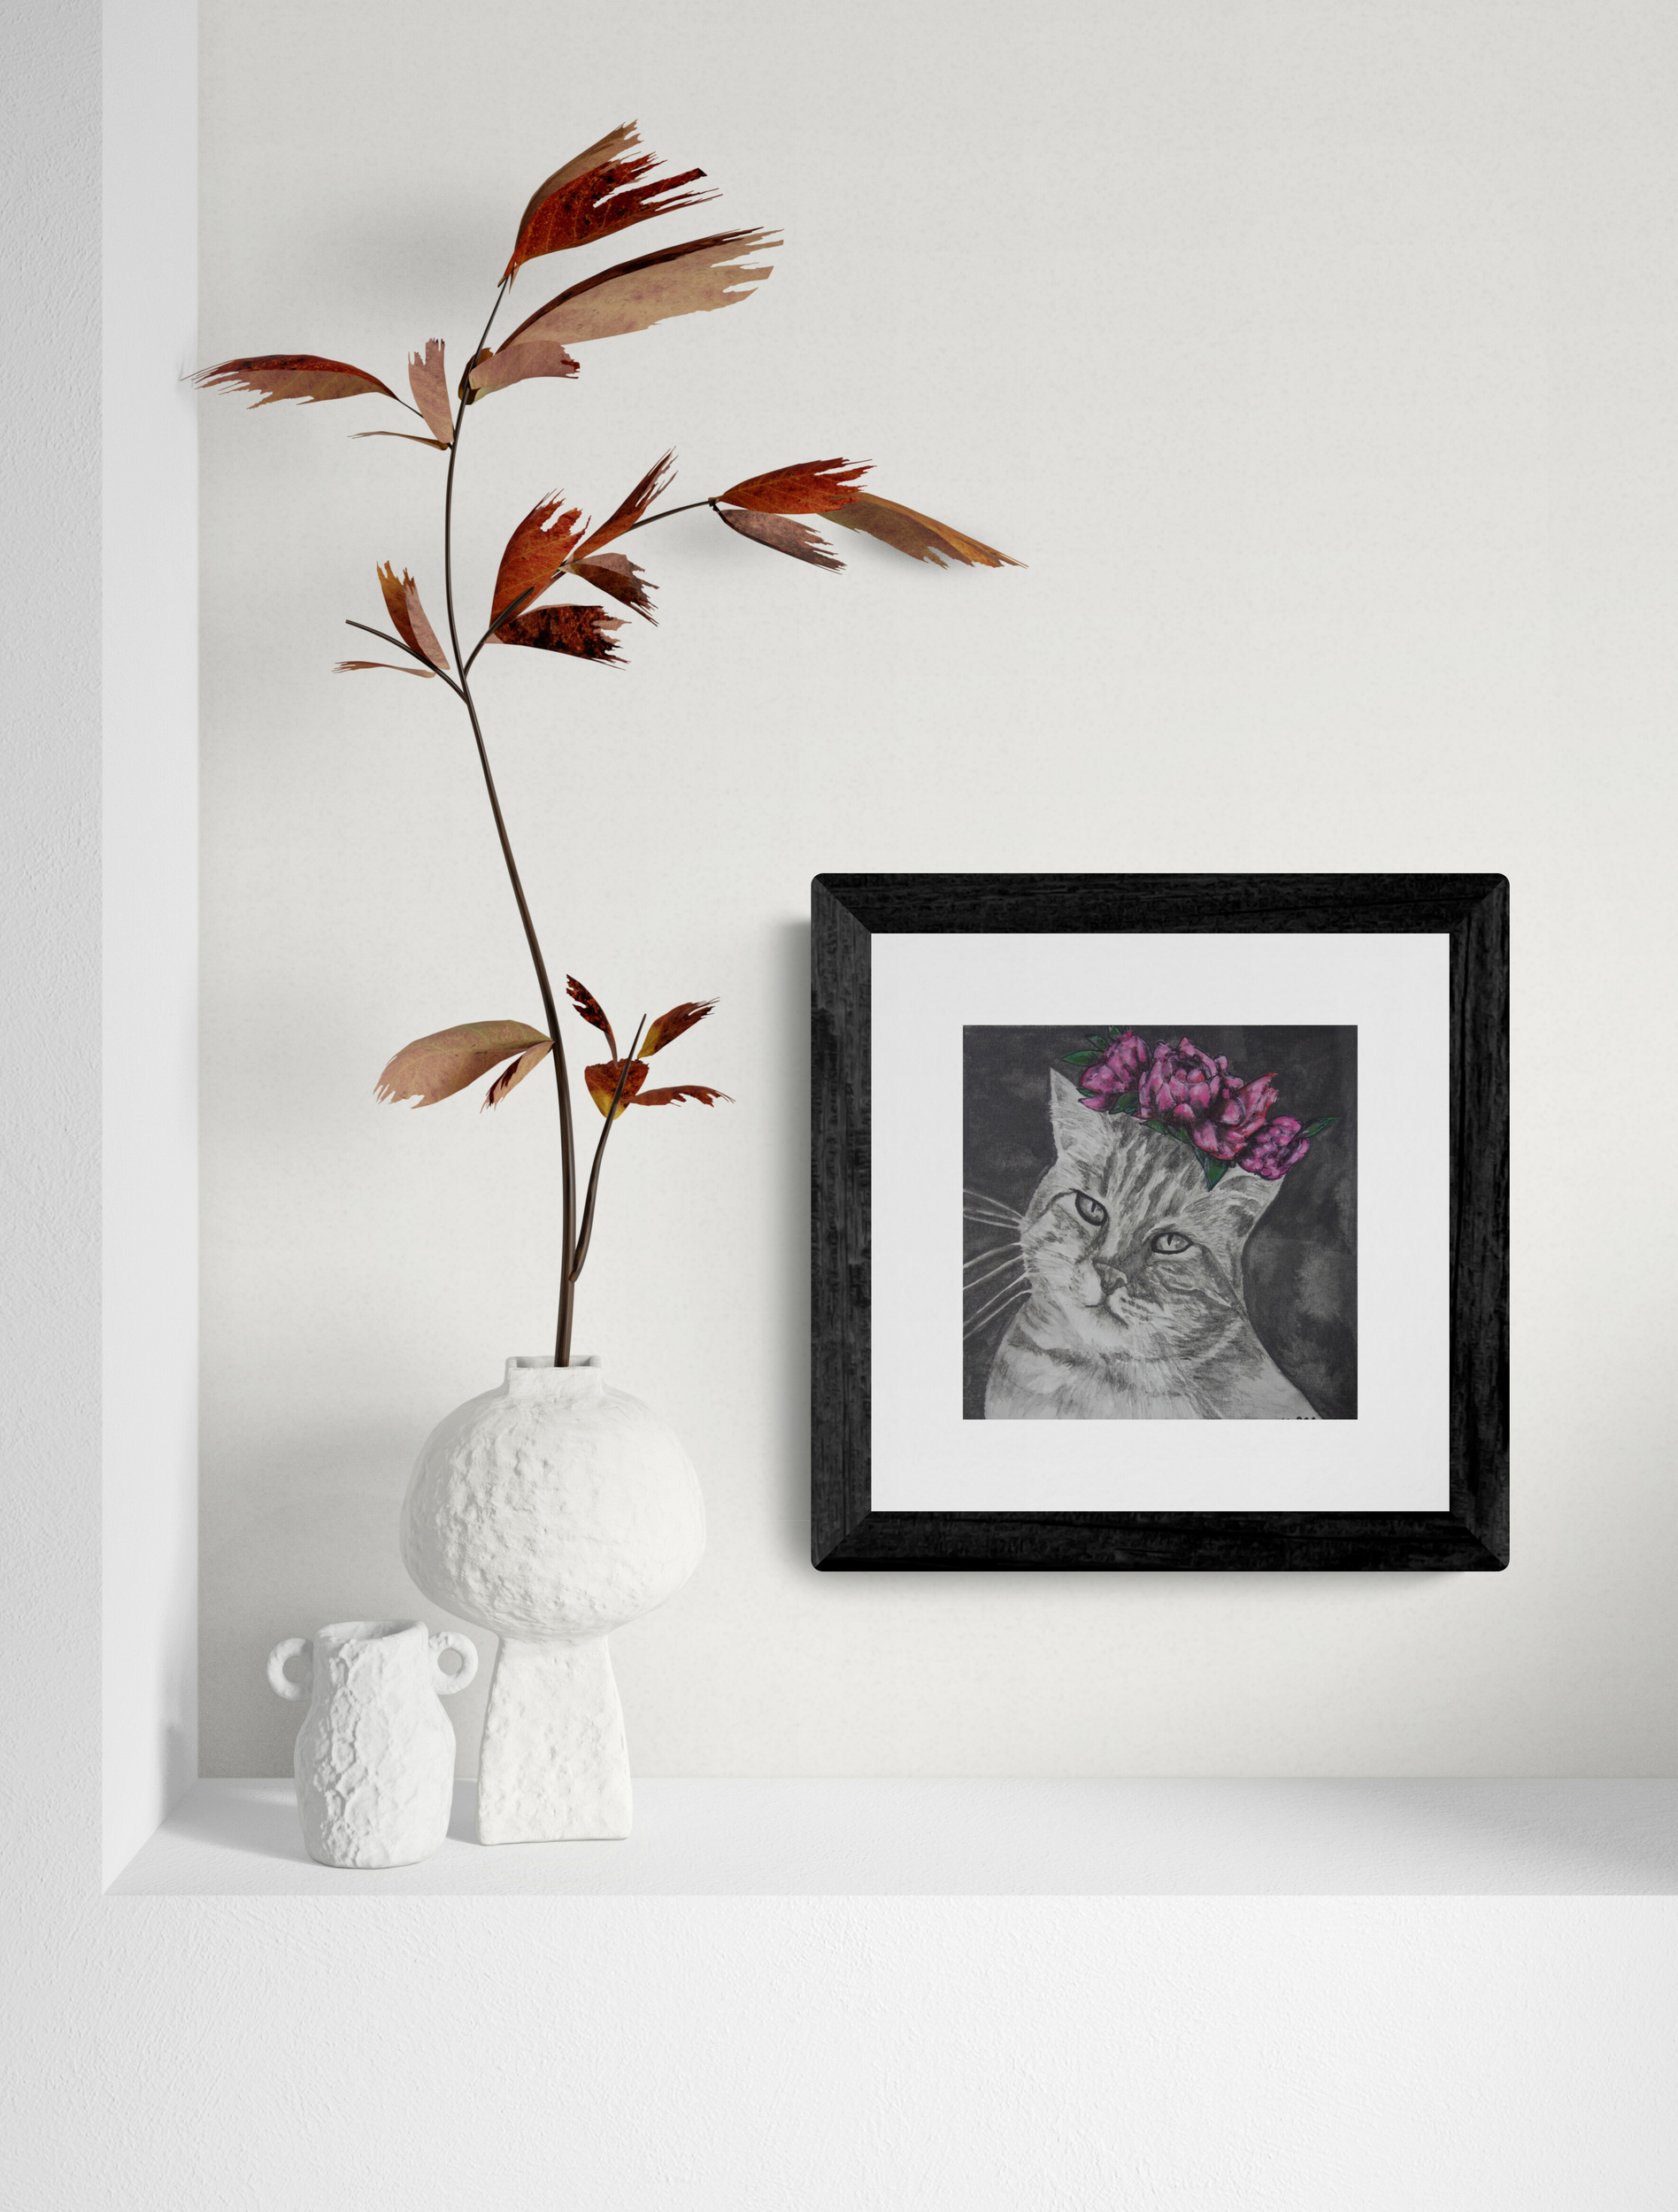 Leafy_plant_sitting_in_wall_alcove (13)